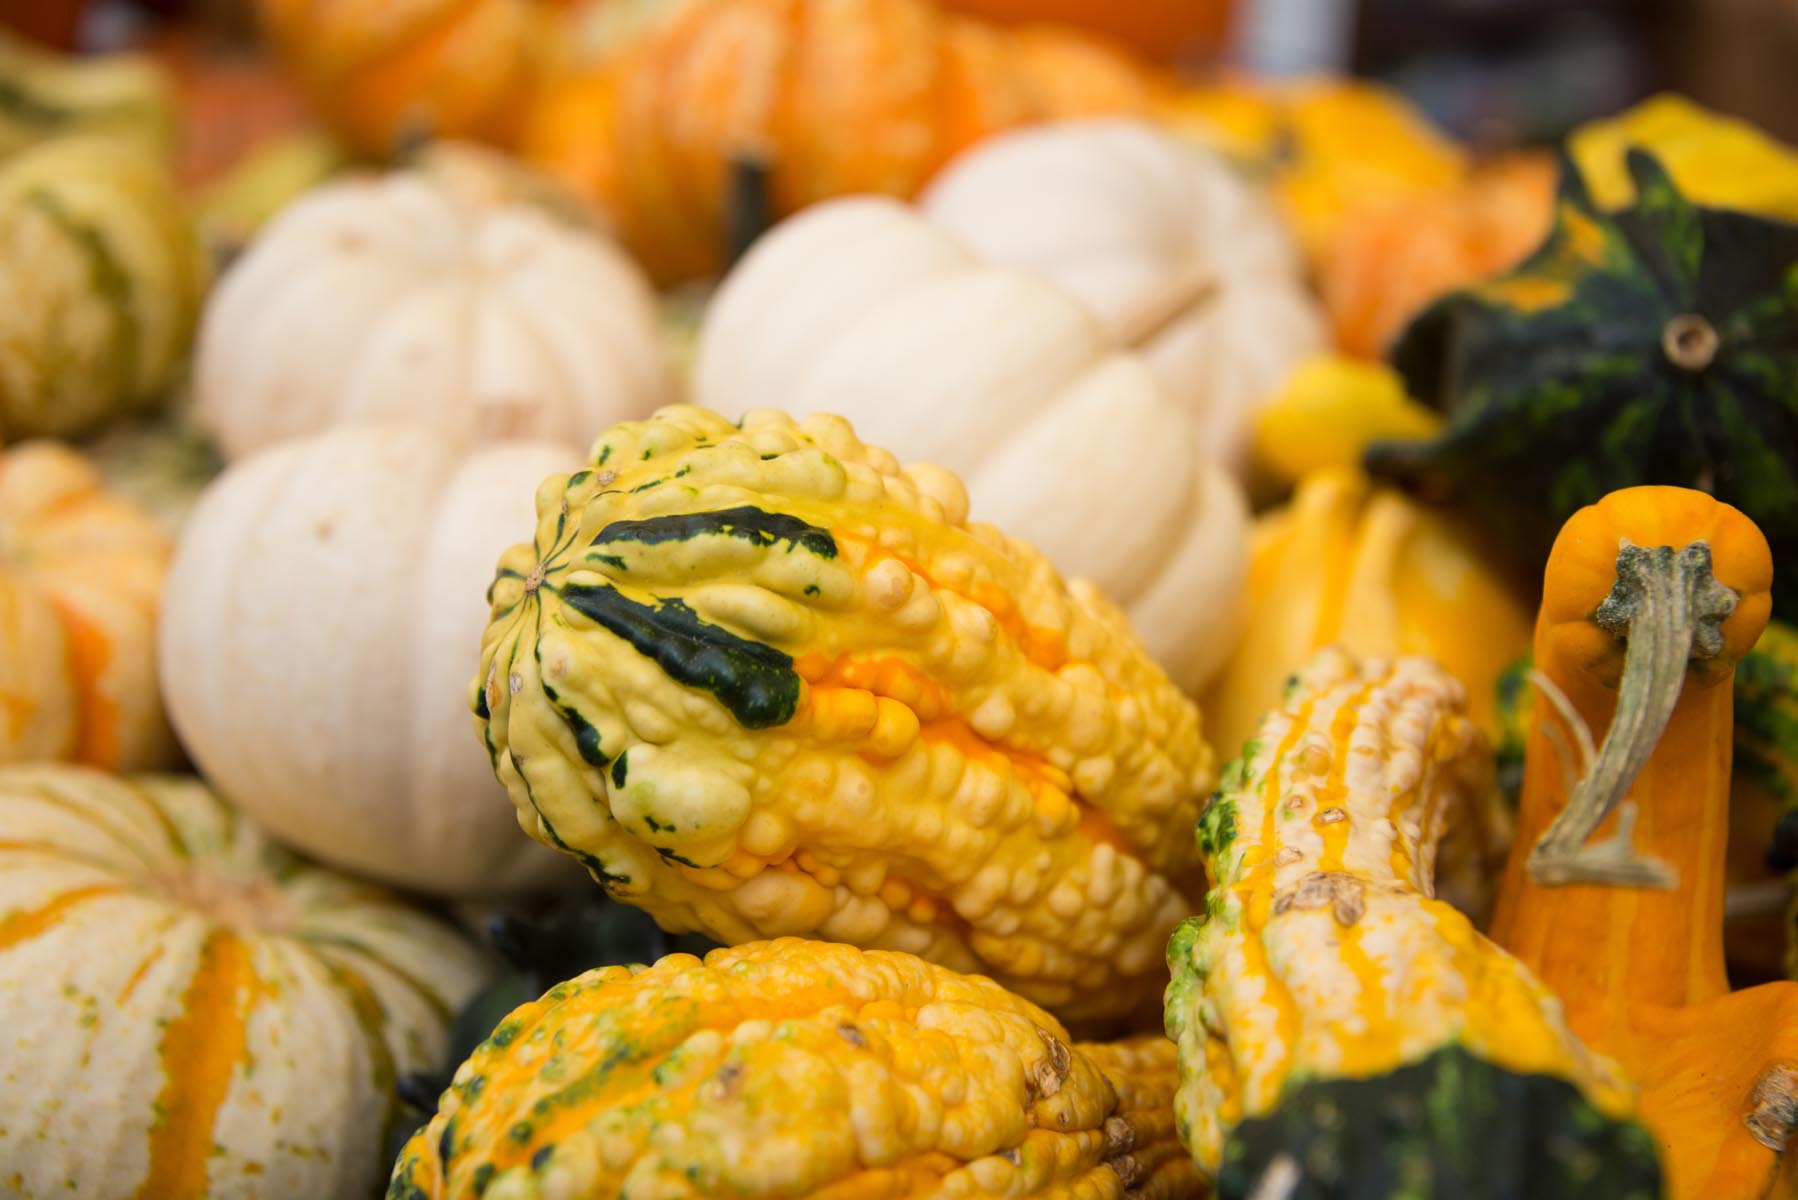 Gourds at The Western North Carolina Farmers Market